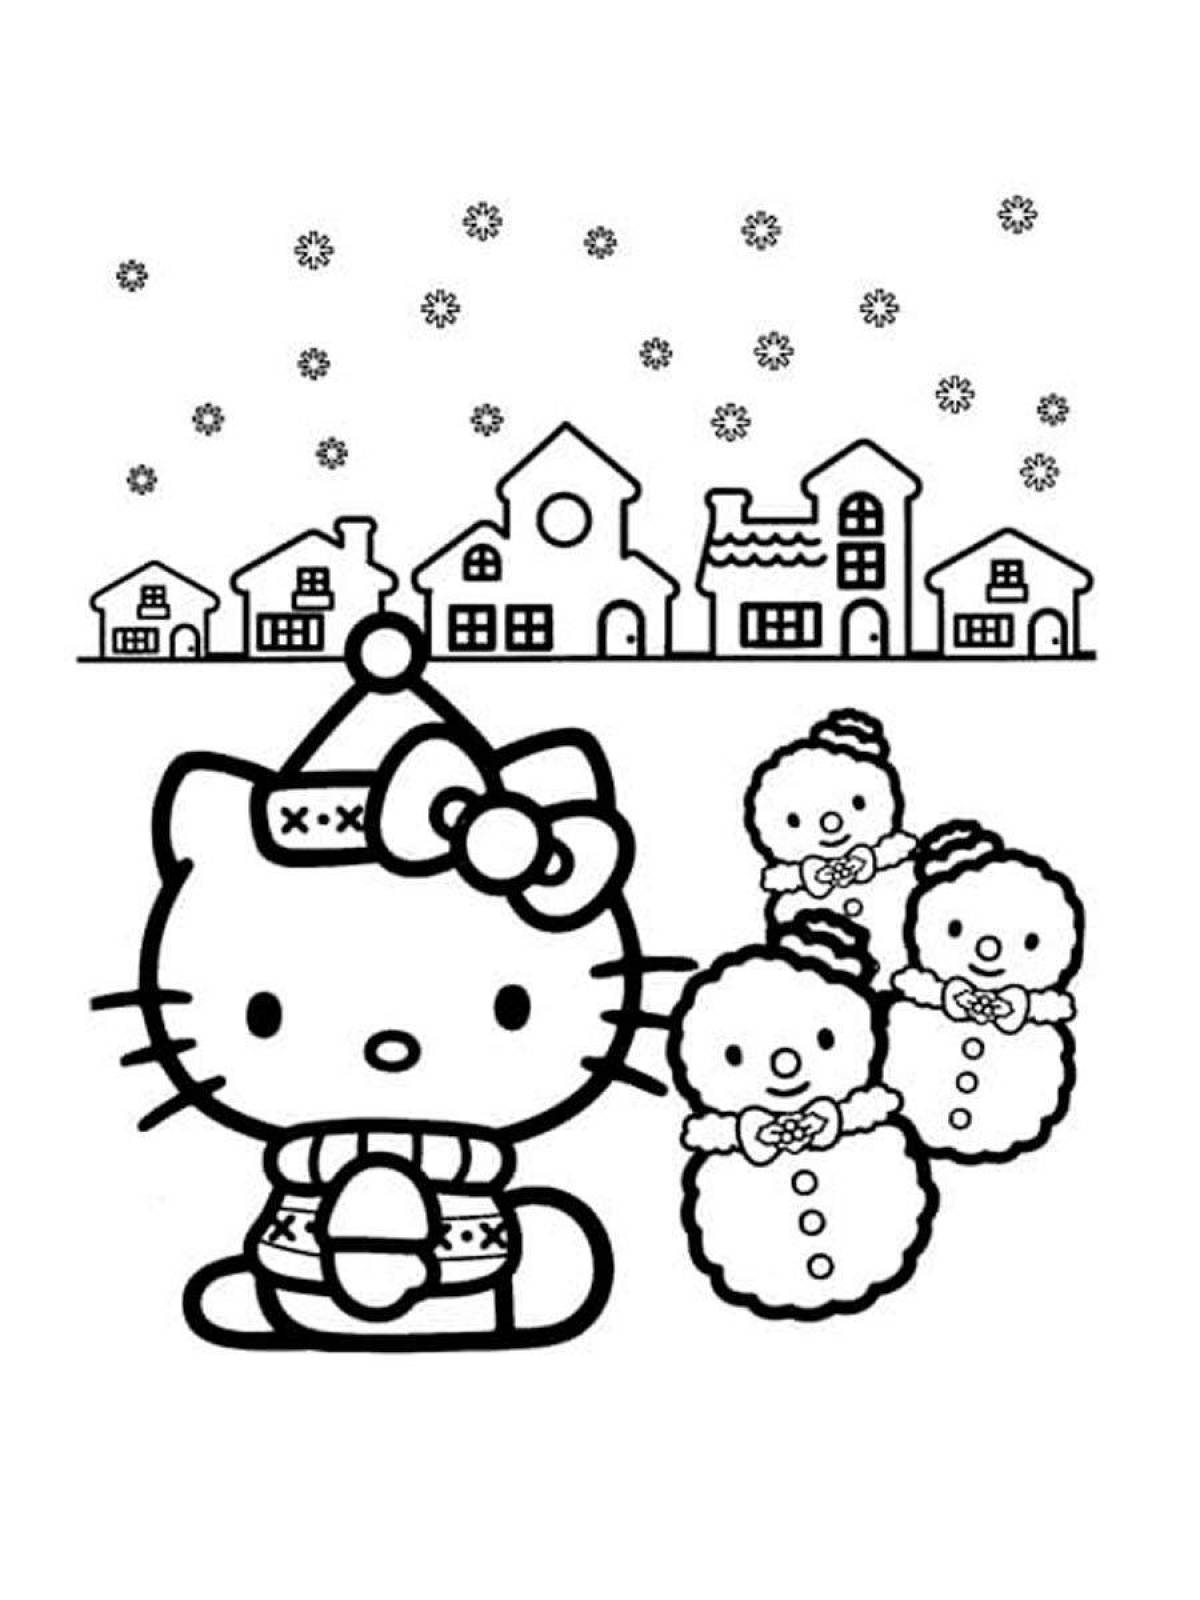 Glowing kitty christmas coloring book